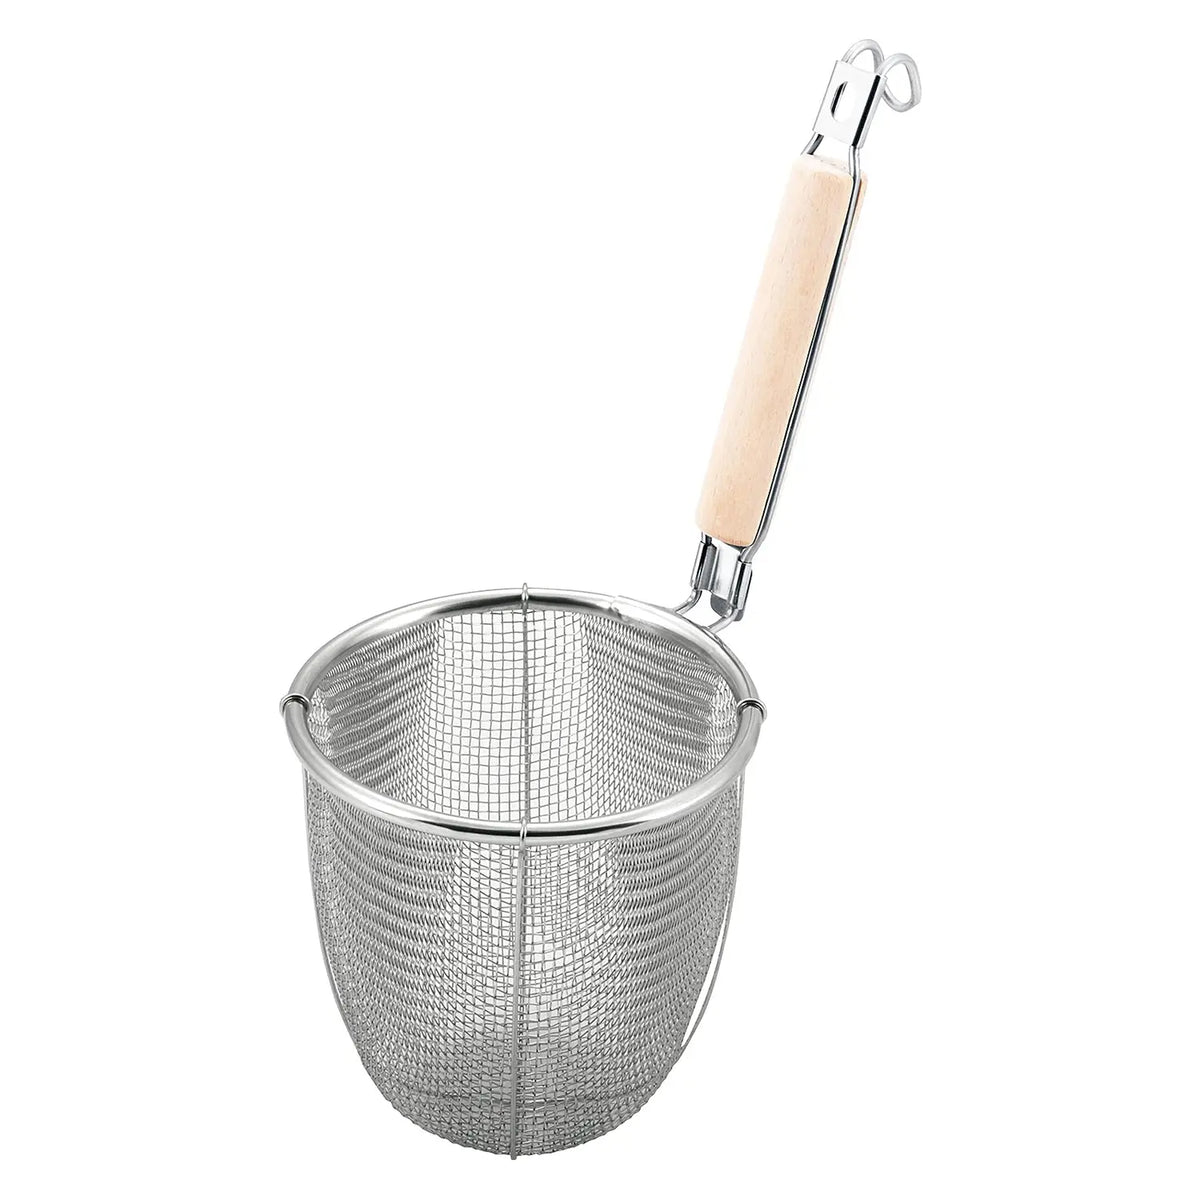 MINEX Stainless Steel Udon Tebo Noodle Strainer Round Base with Plain Wooden Handle